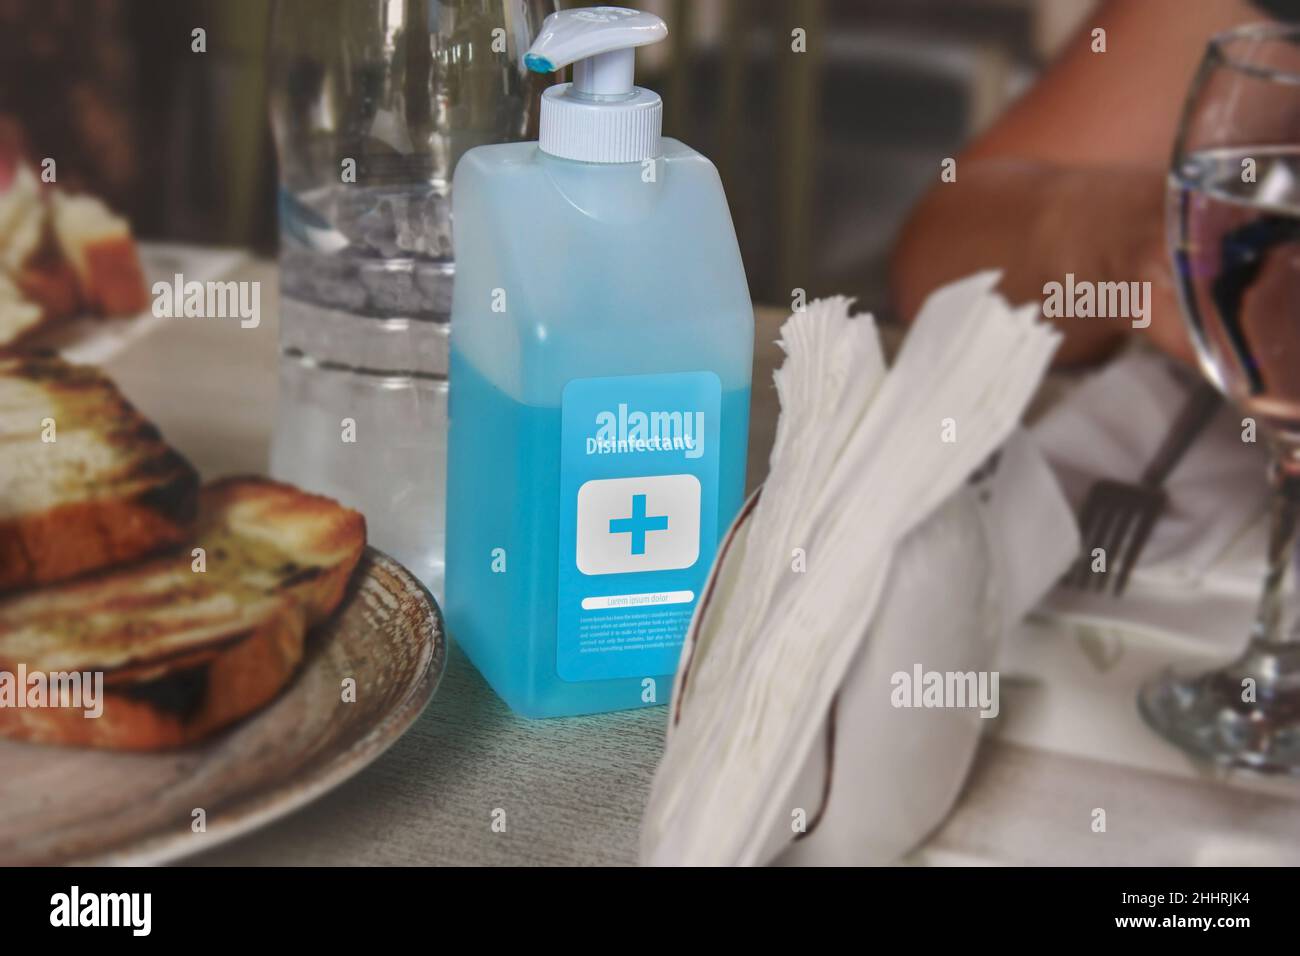 Disinfectant bottle on a table in the restaurant to prevet COVID-19 Coronavirus pandemic. Small businesses are in trouble without tourism and clients. Stock Photo